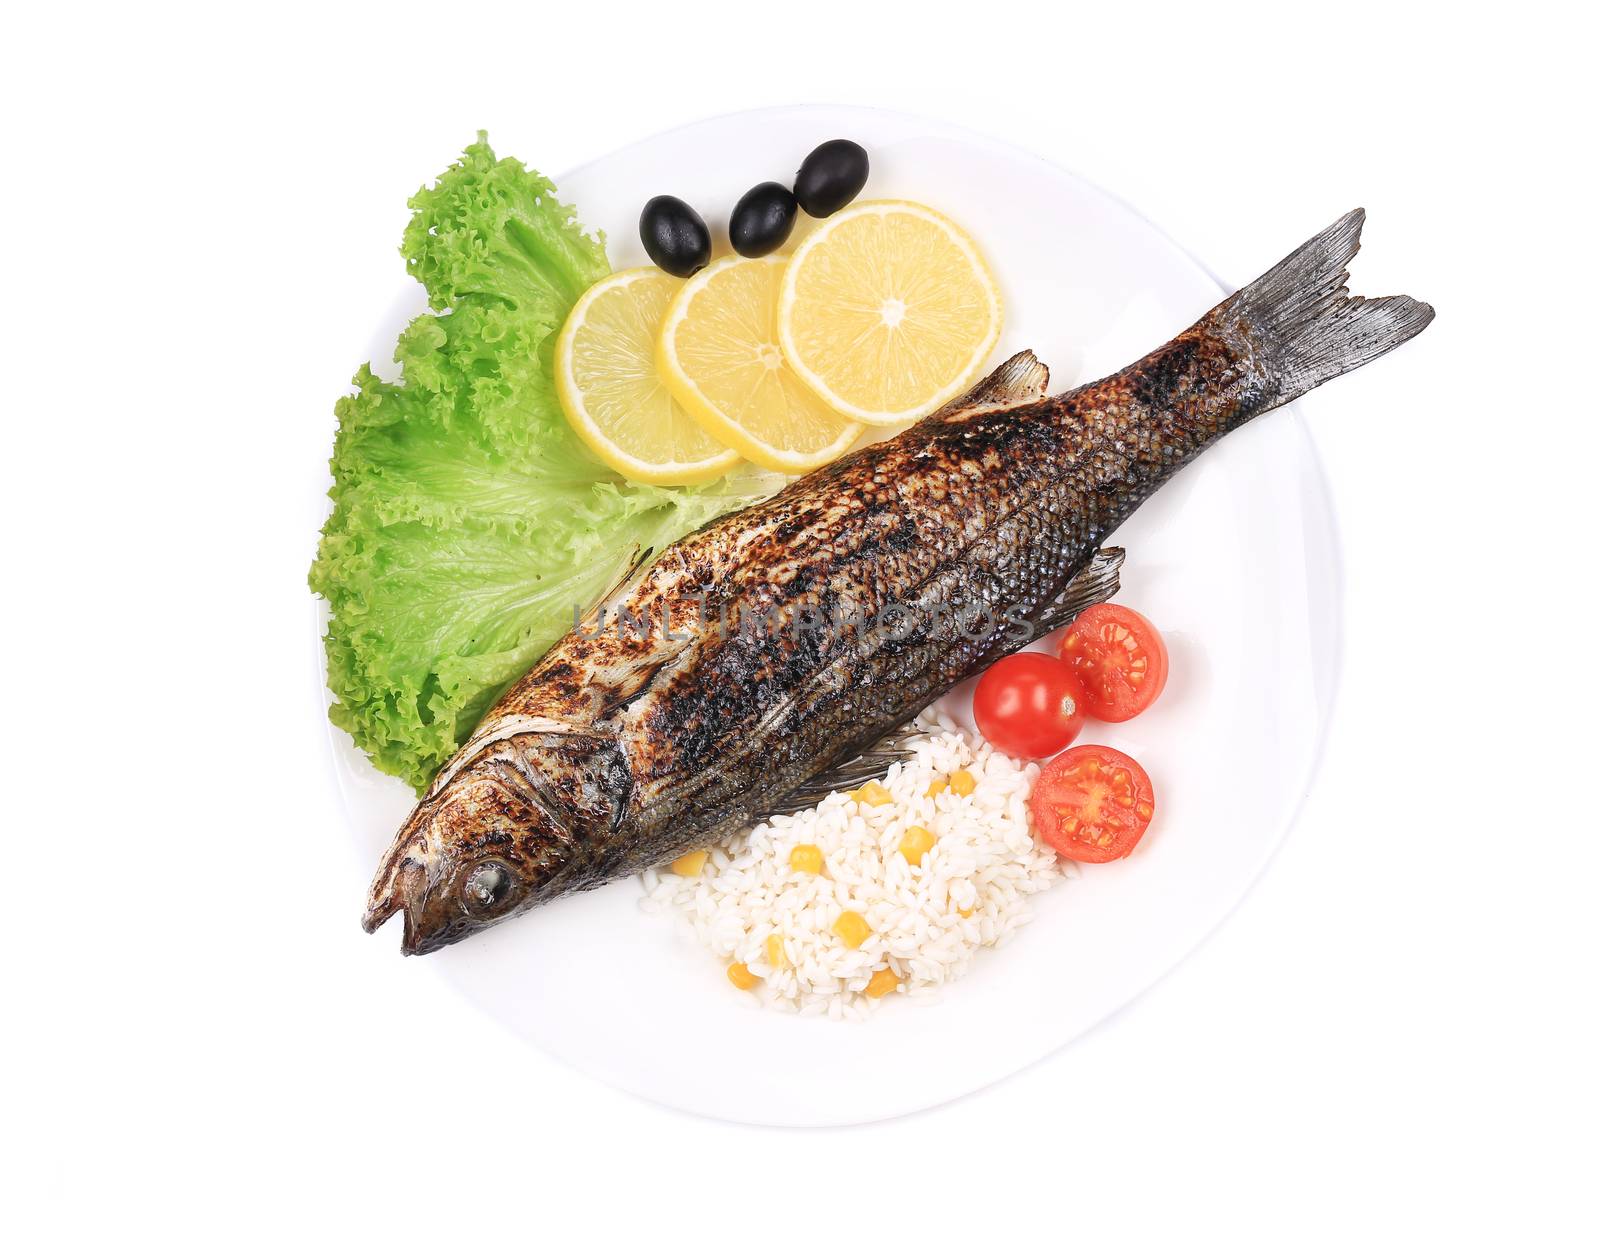 Grilled fish with vegetables on plate. Isolated on a white background.